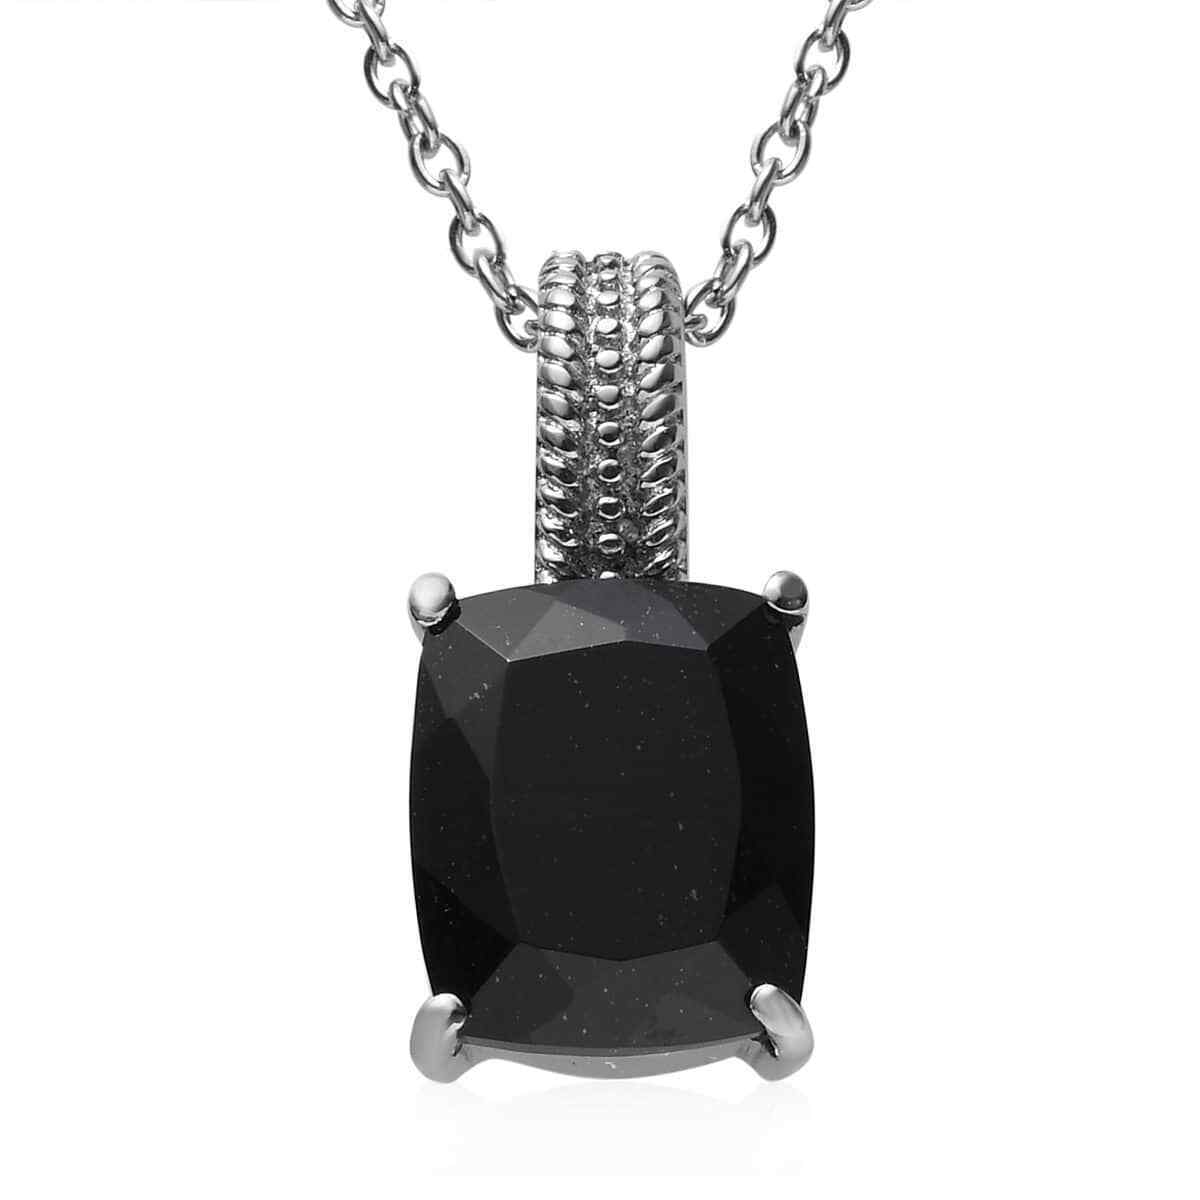 Black Tourmaline Pendant Necklace for Women 20" in Ct 5.8 Jewelry Birthday Gifts